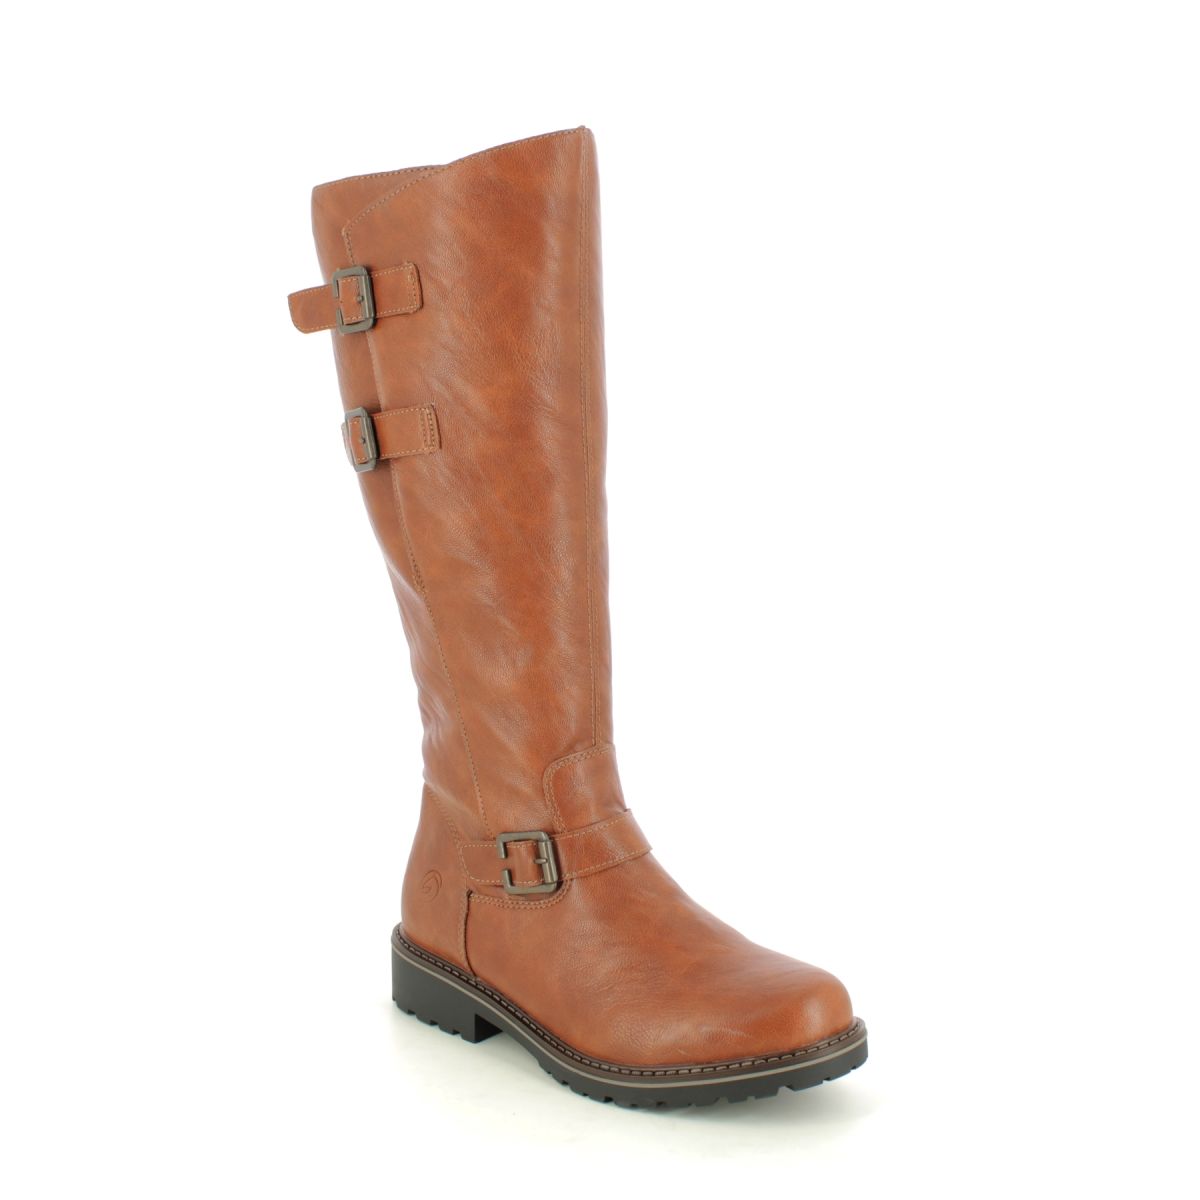 Remonte Indah Shearling Tan Womens Knee-High Boots R6590-22 In Size 39 In Plain Tan